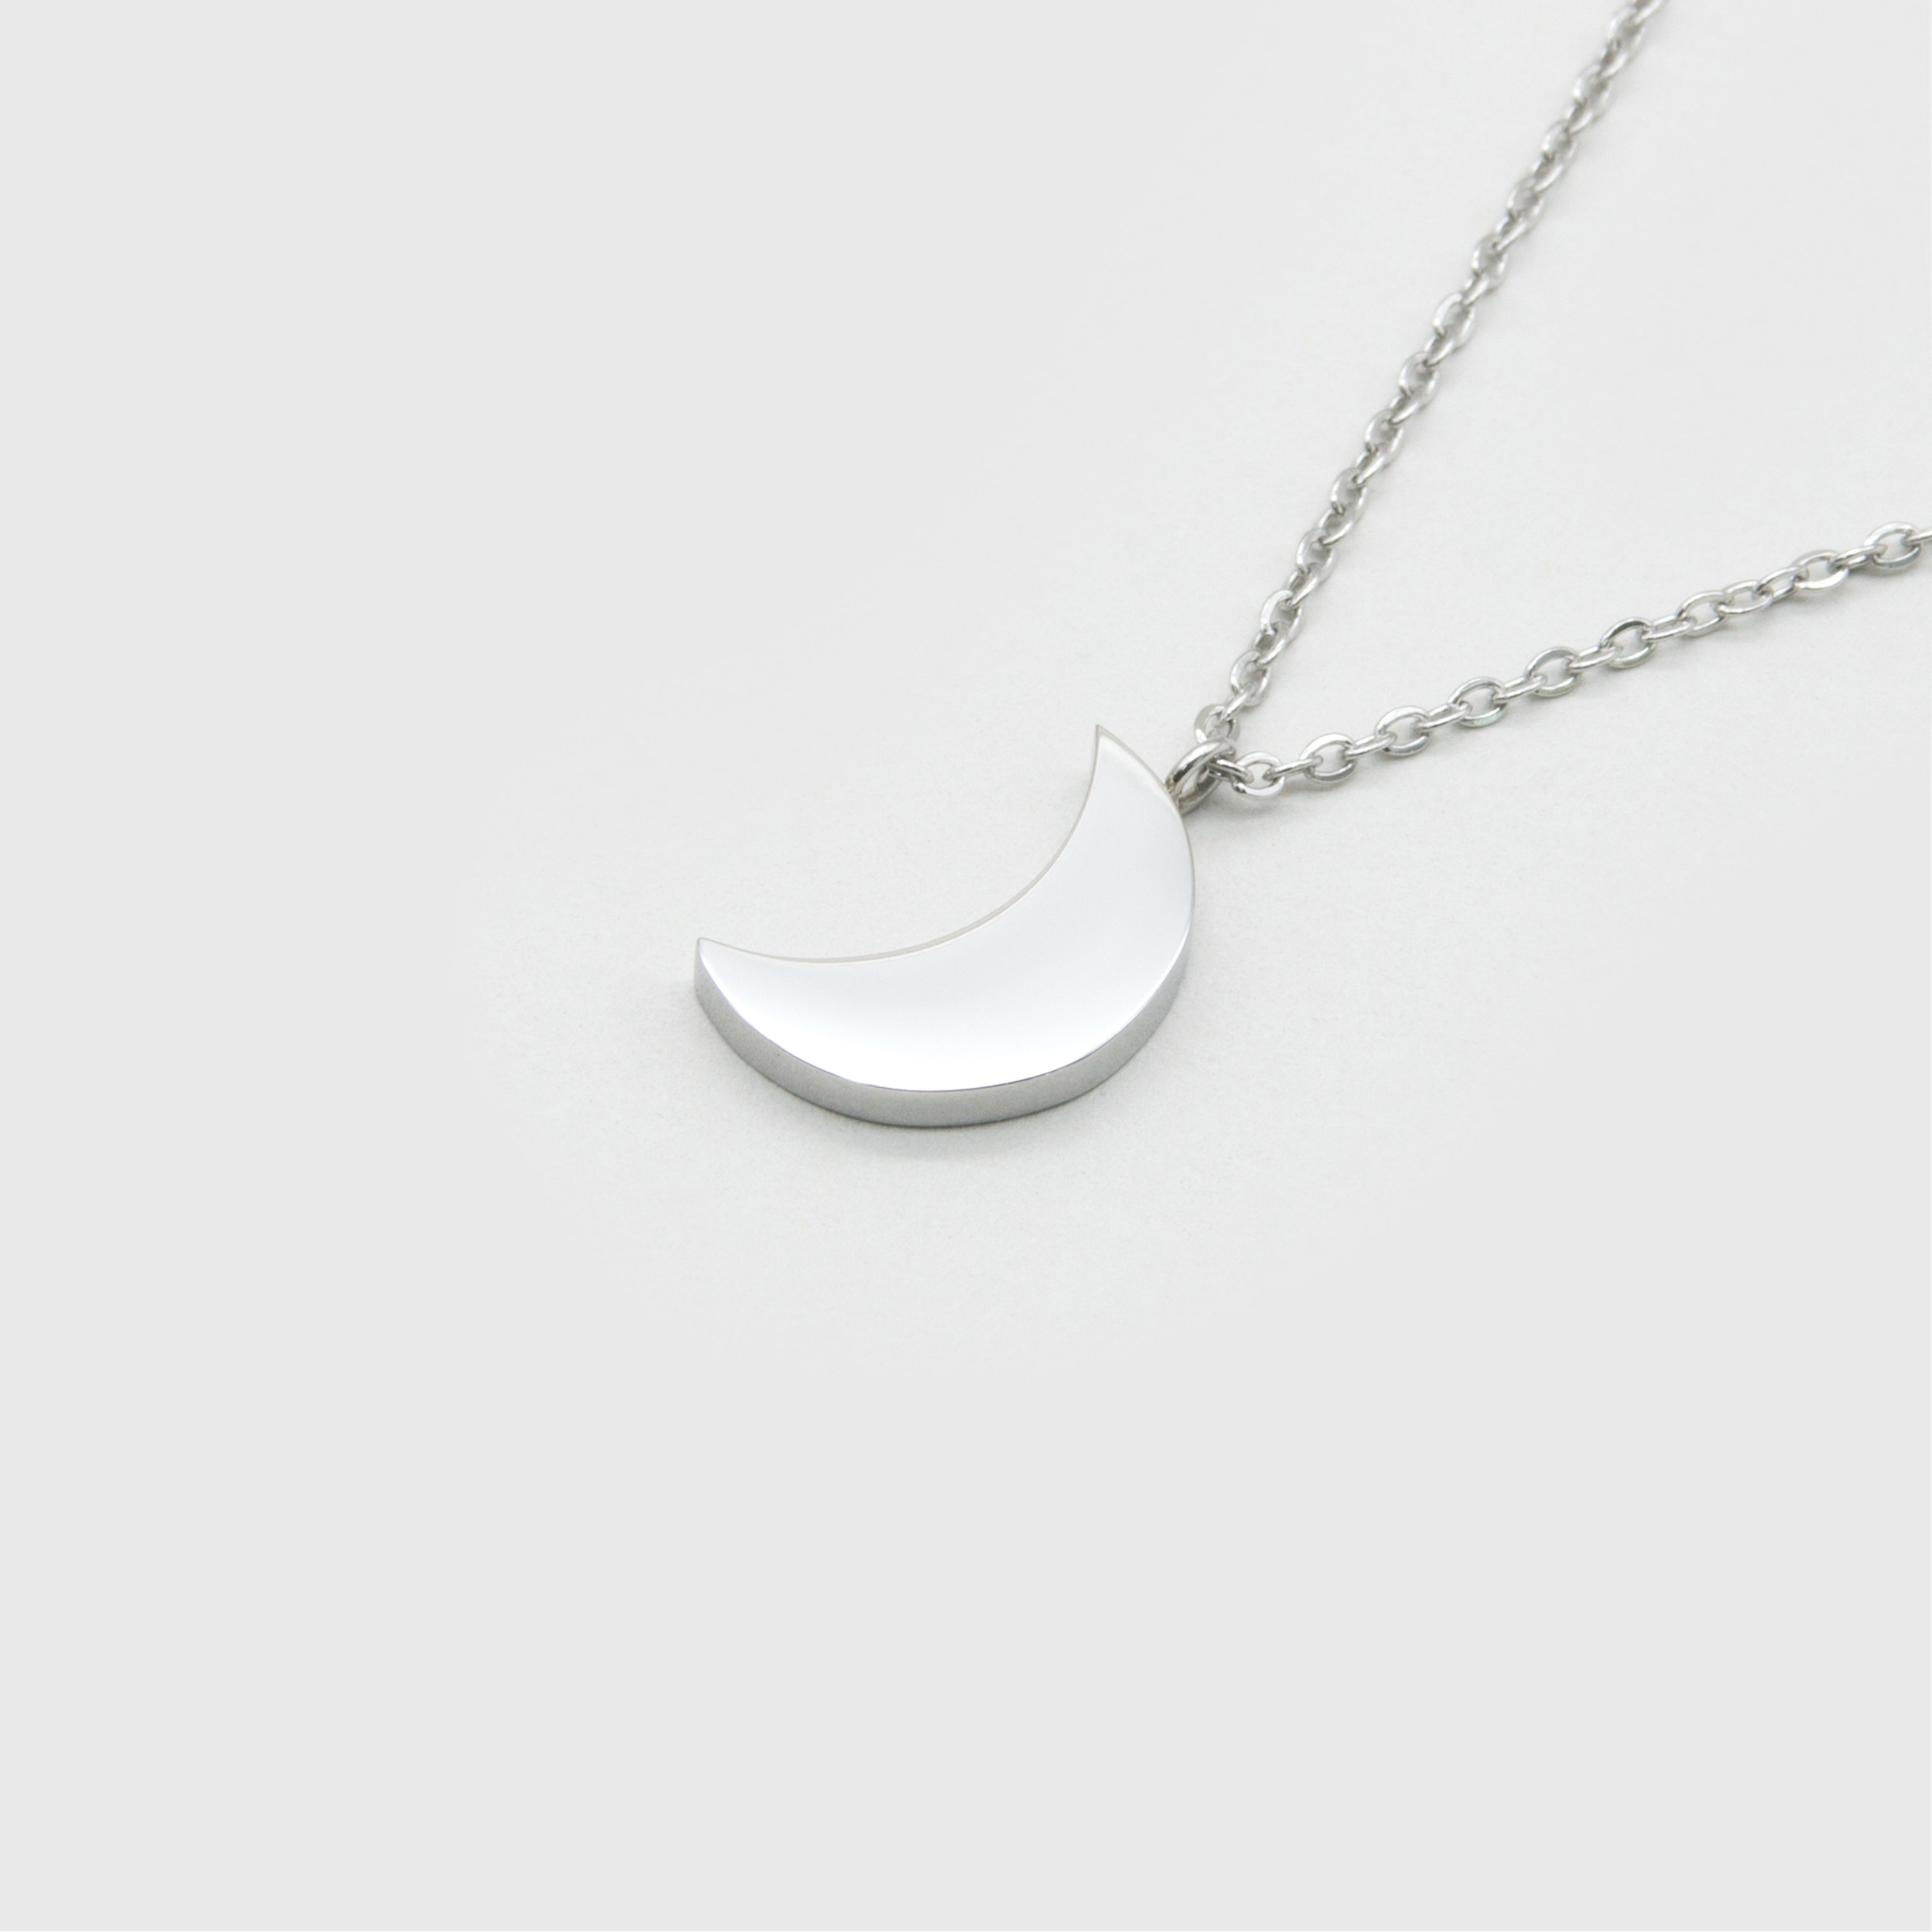 Kuku silver crescent moon necklace